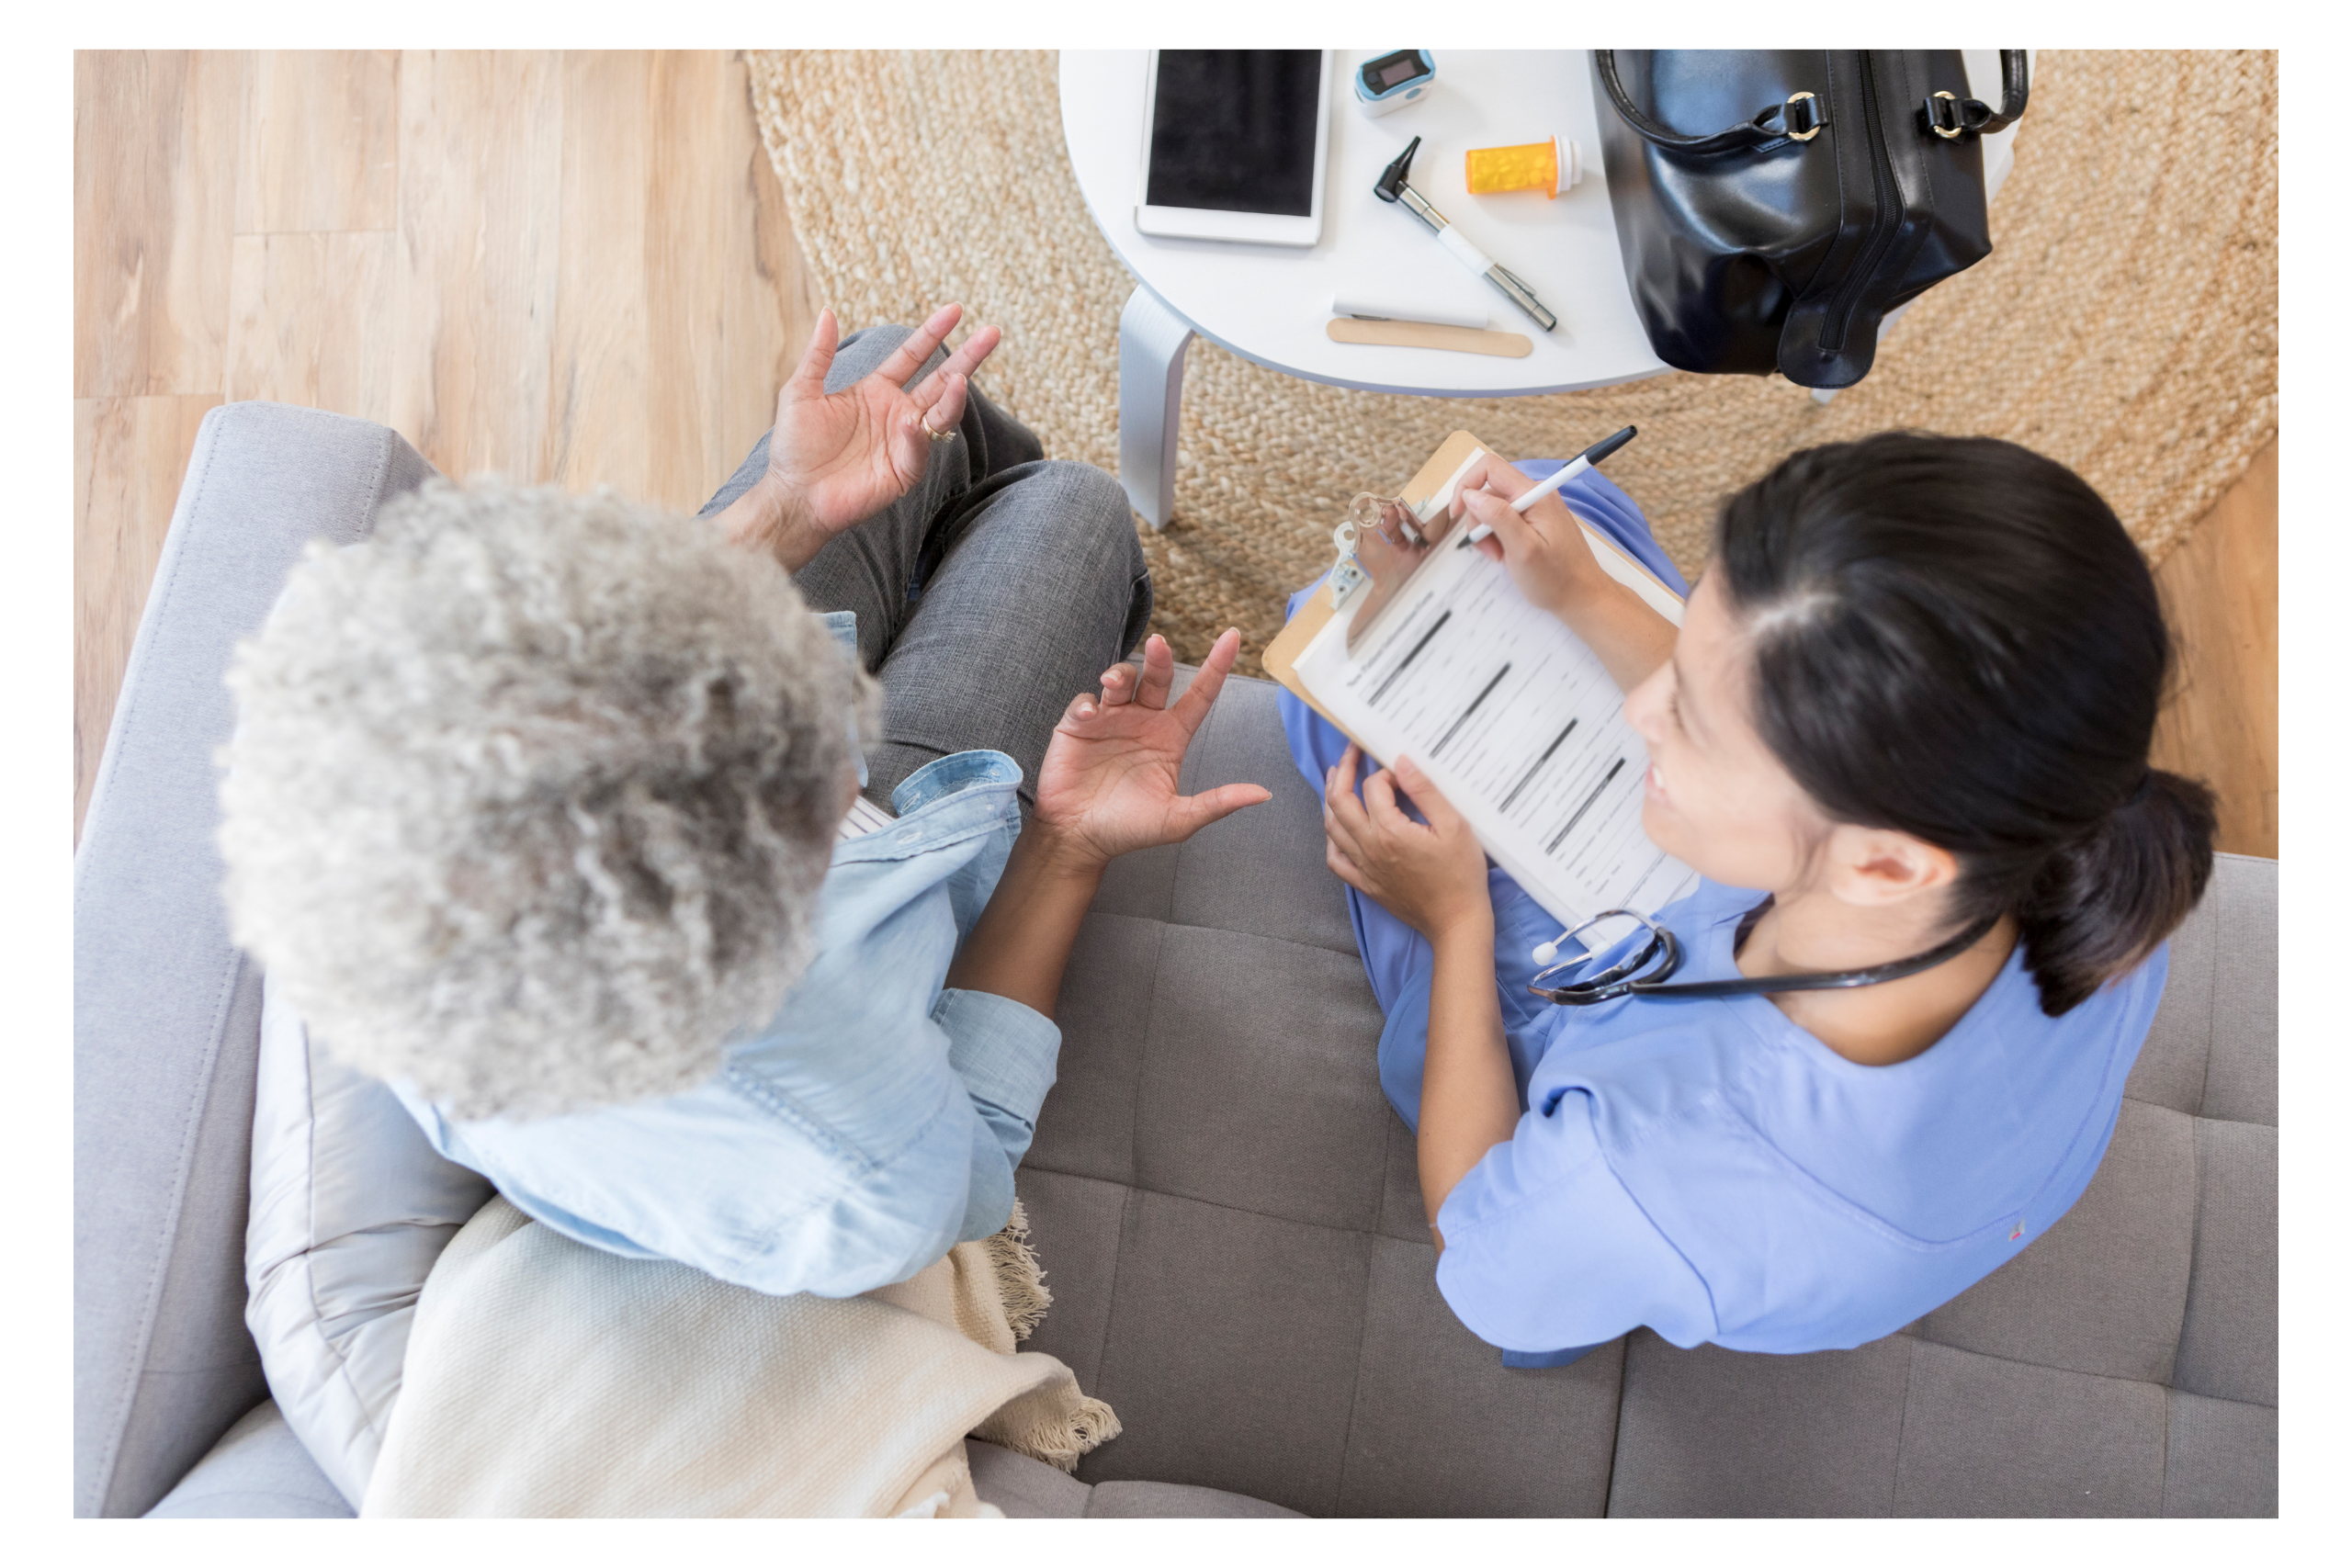 Overhead view of a healthcare professional in blue attire taking notes while attentively listening to an elderly woman gesturing during a conversation, symbolizing effective communication in nursing home advocacy.